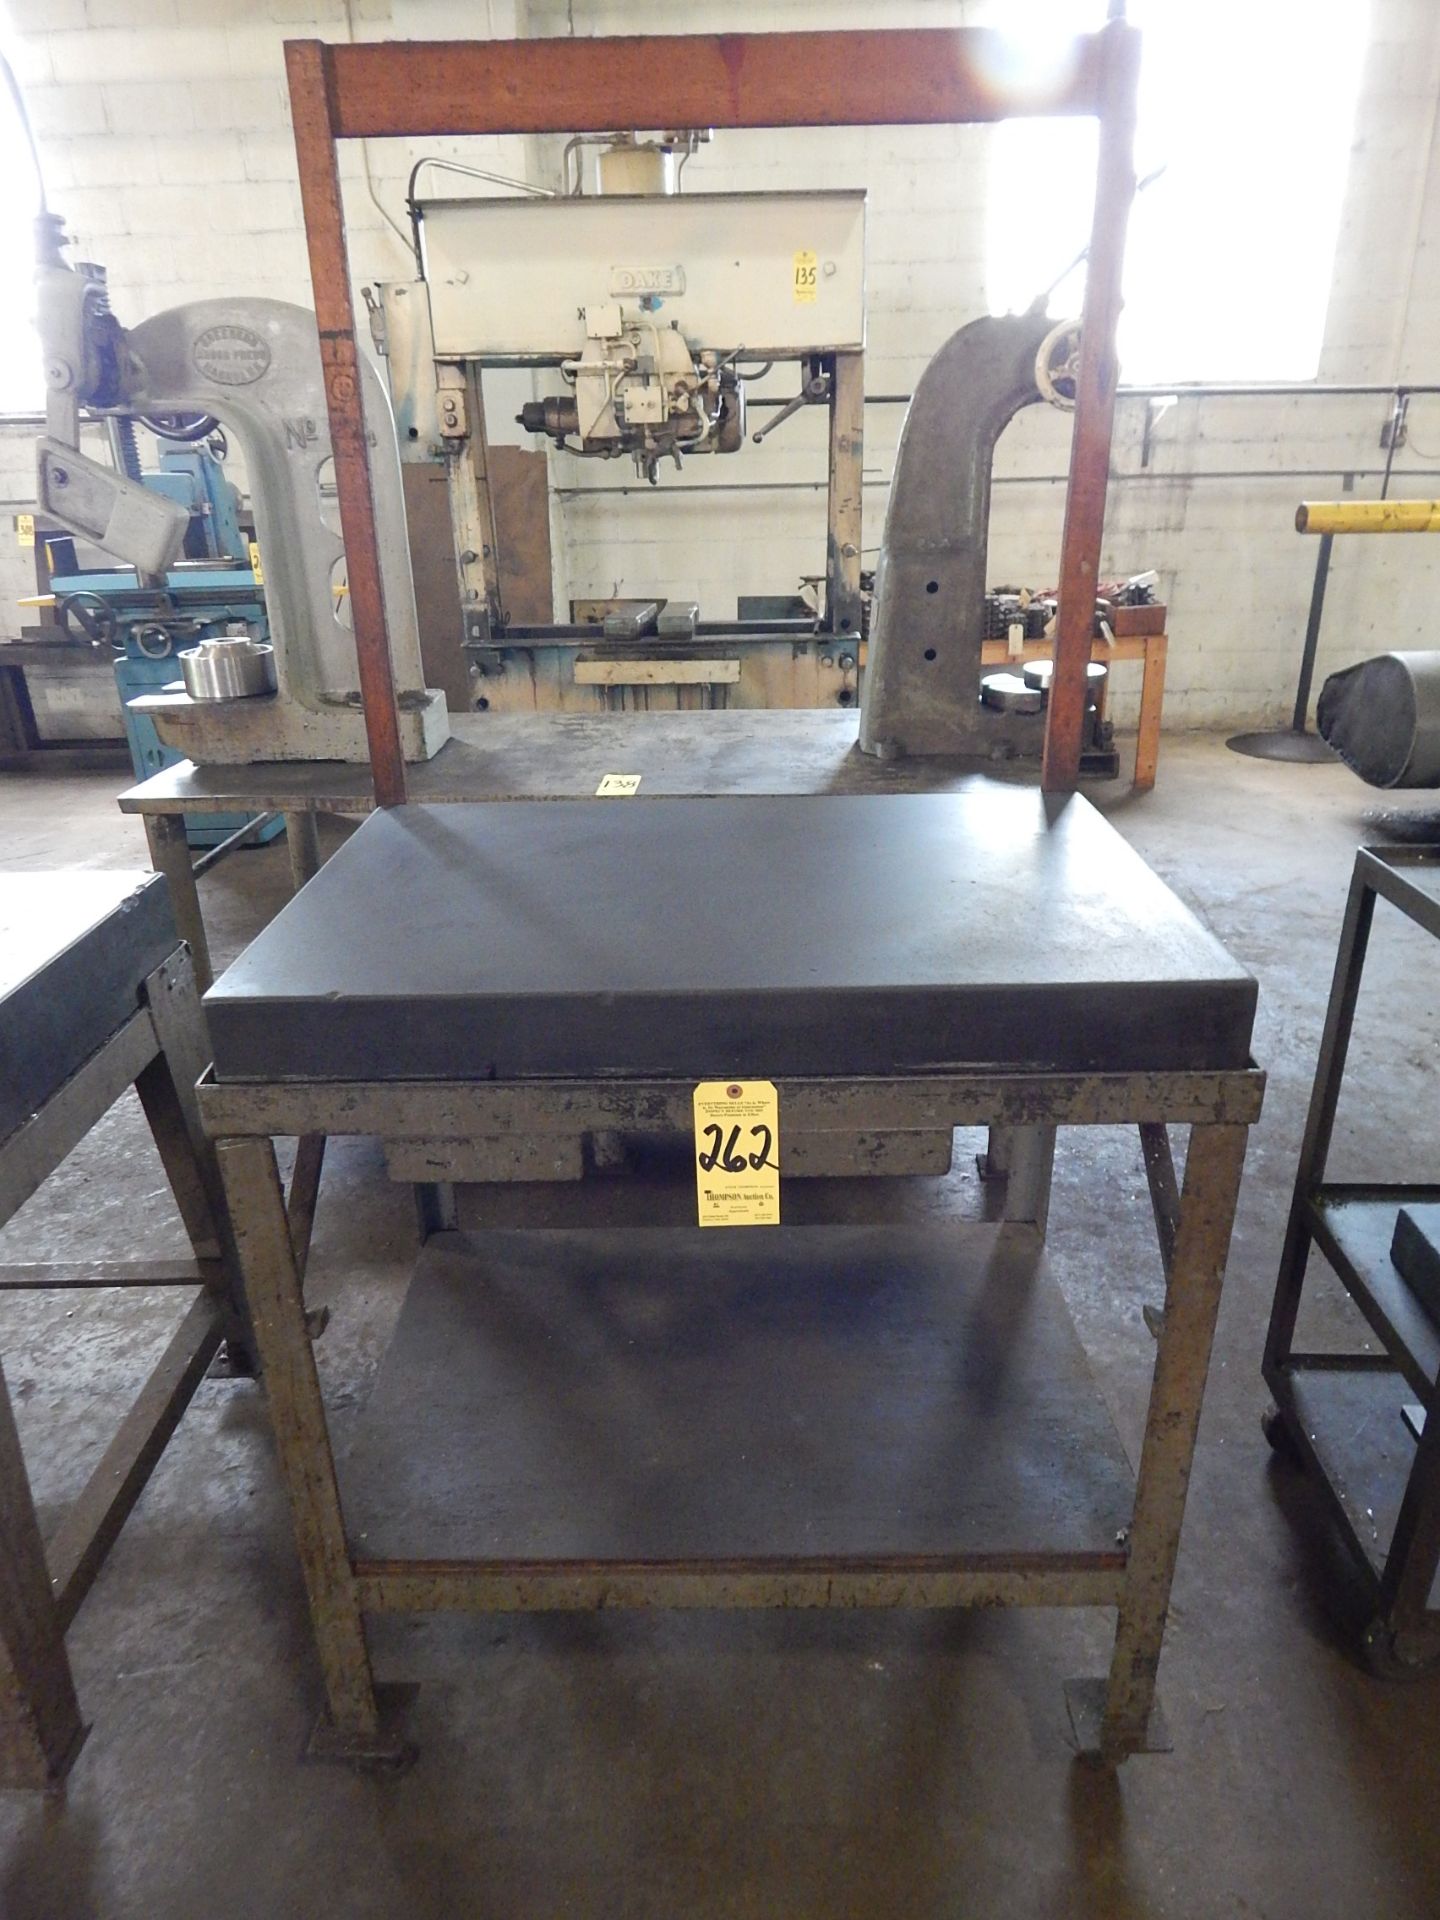 DoAll 24 In. X 36 In. X 4 In. Granite Surface Plate with Stand, Loading Fee $50.00